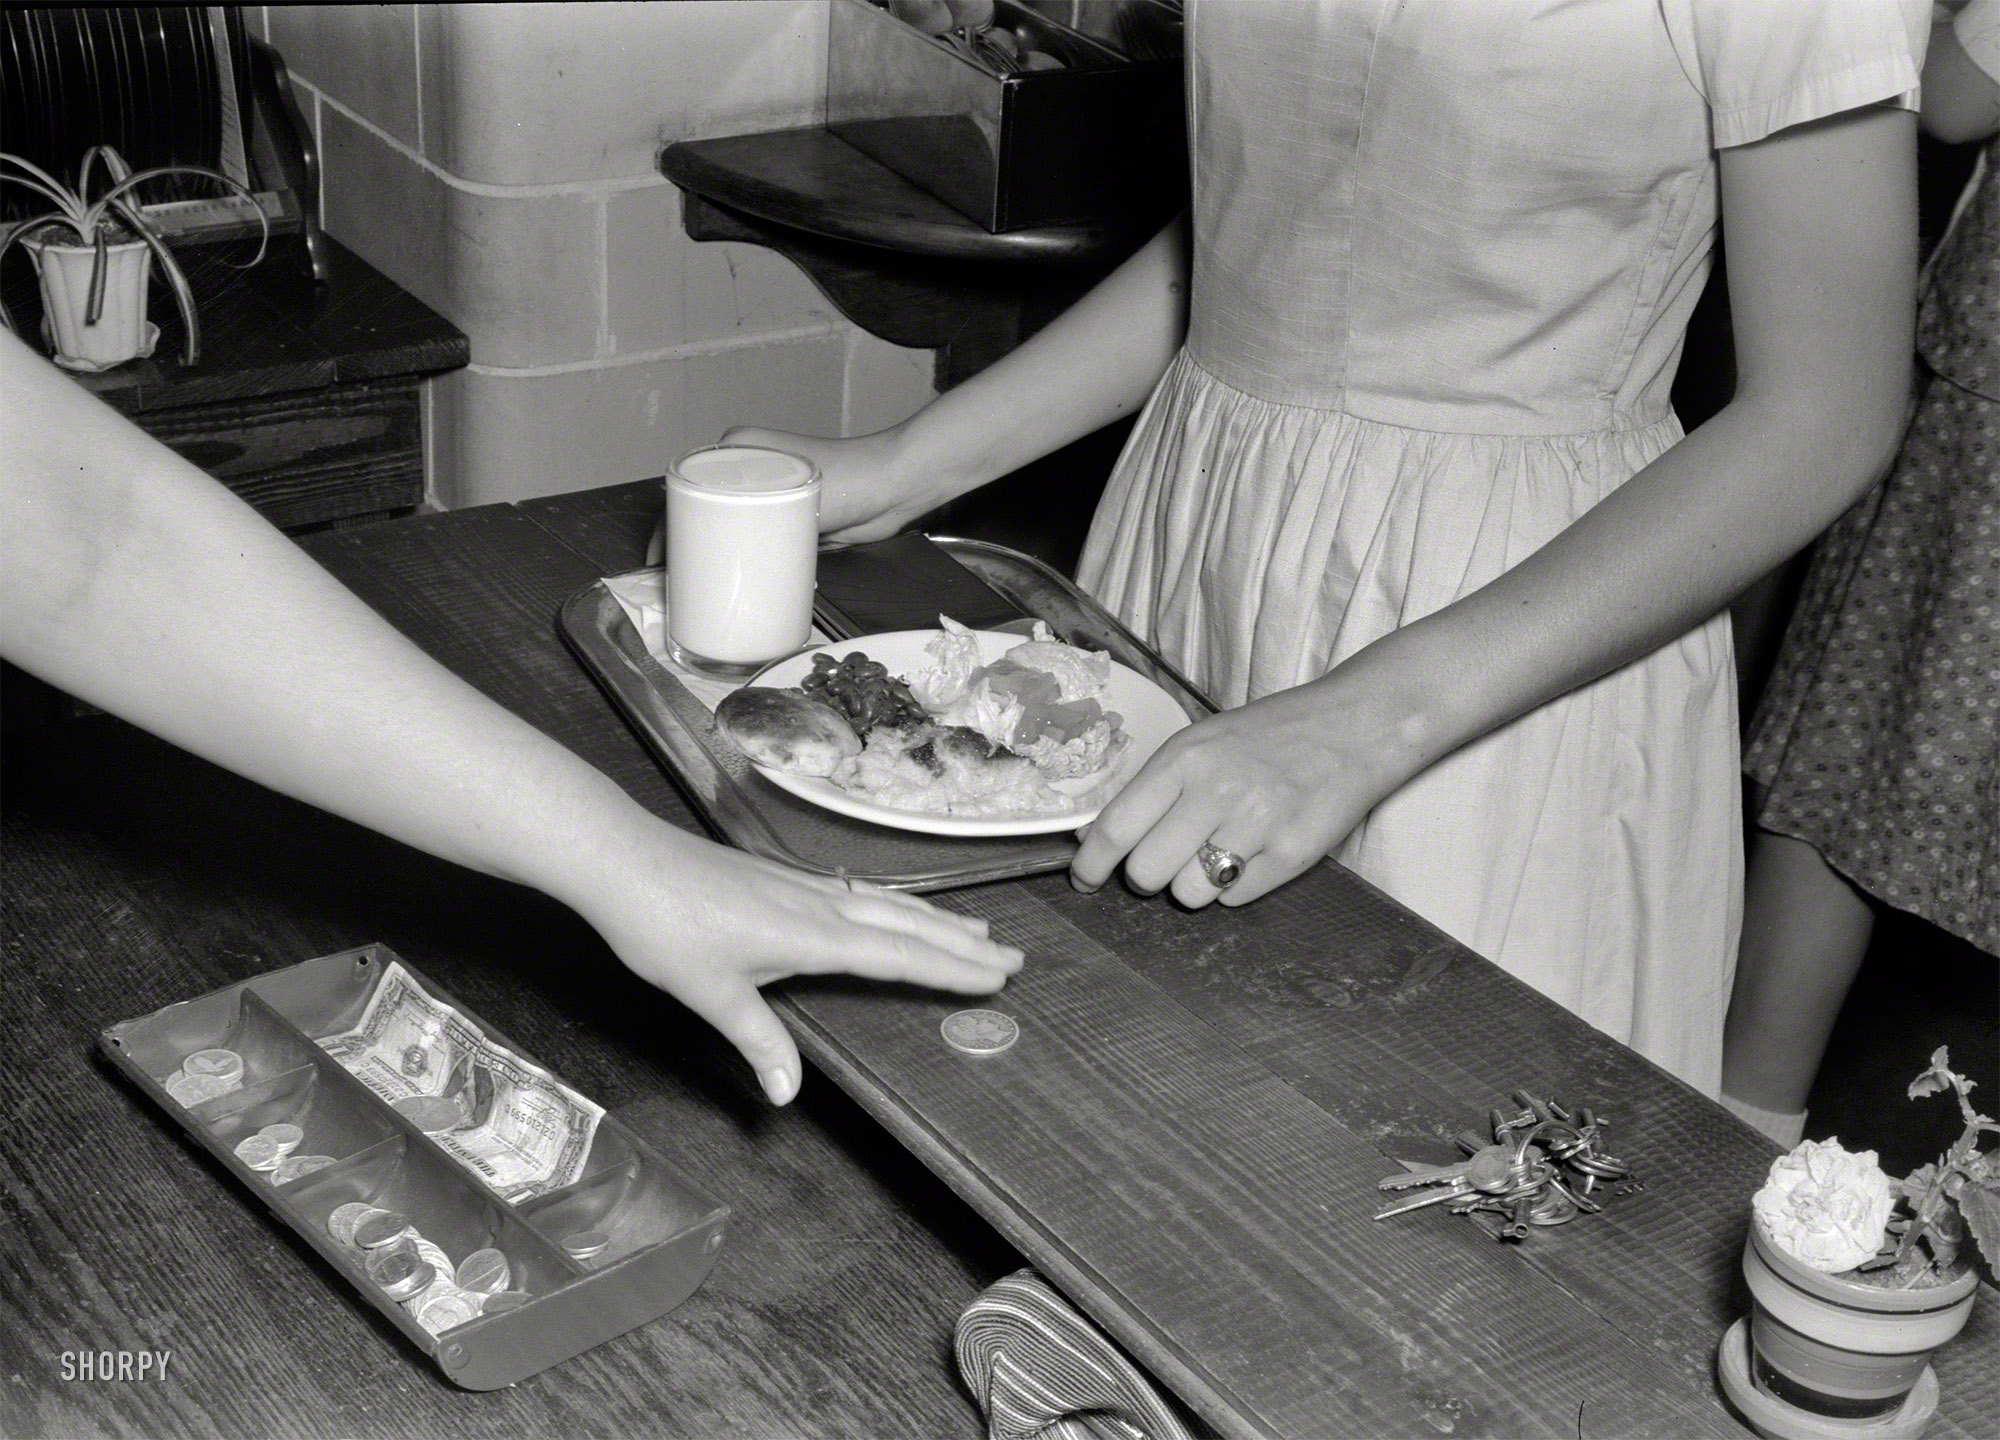 May 1943. "Keysville, Virginia. Randolph Henry High School cafeteria. Typical lunch for 15 cents: candied yams, macaroni and cheese, fruit salad, deviled eggs, dessert and milk. Milk is free and children can have as much as they want." Photo by Philip Bonn for the Office of War Information. View full size.